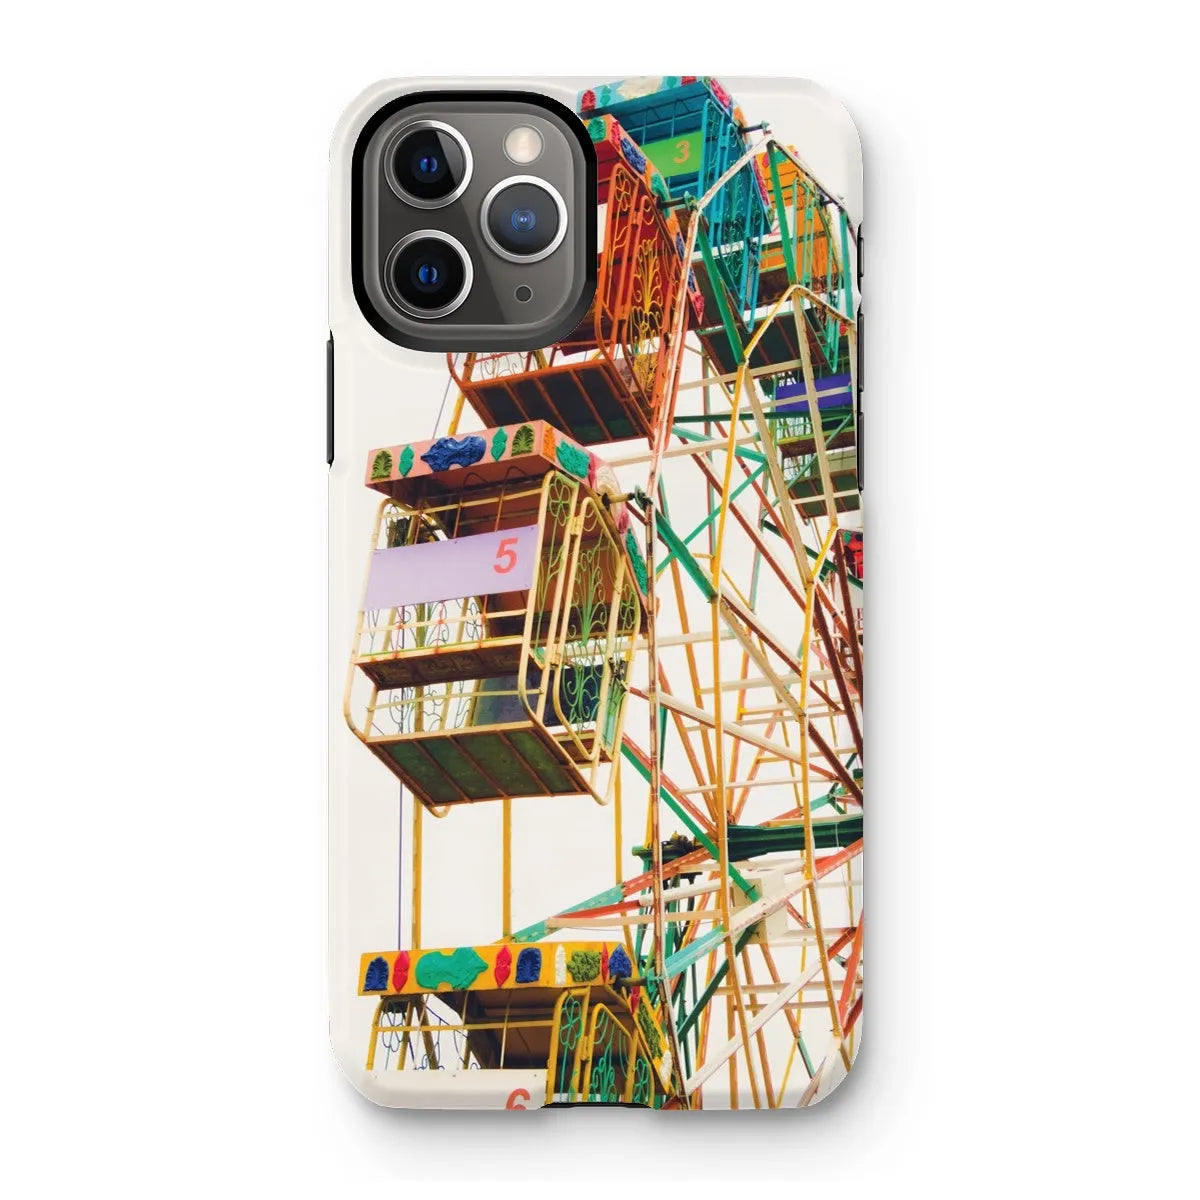 Wheel Of Fortune Tough Phone Case - Iphone 11 Pro / Matte - Mobile Phone Cases - Aesthetic Art